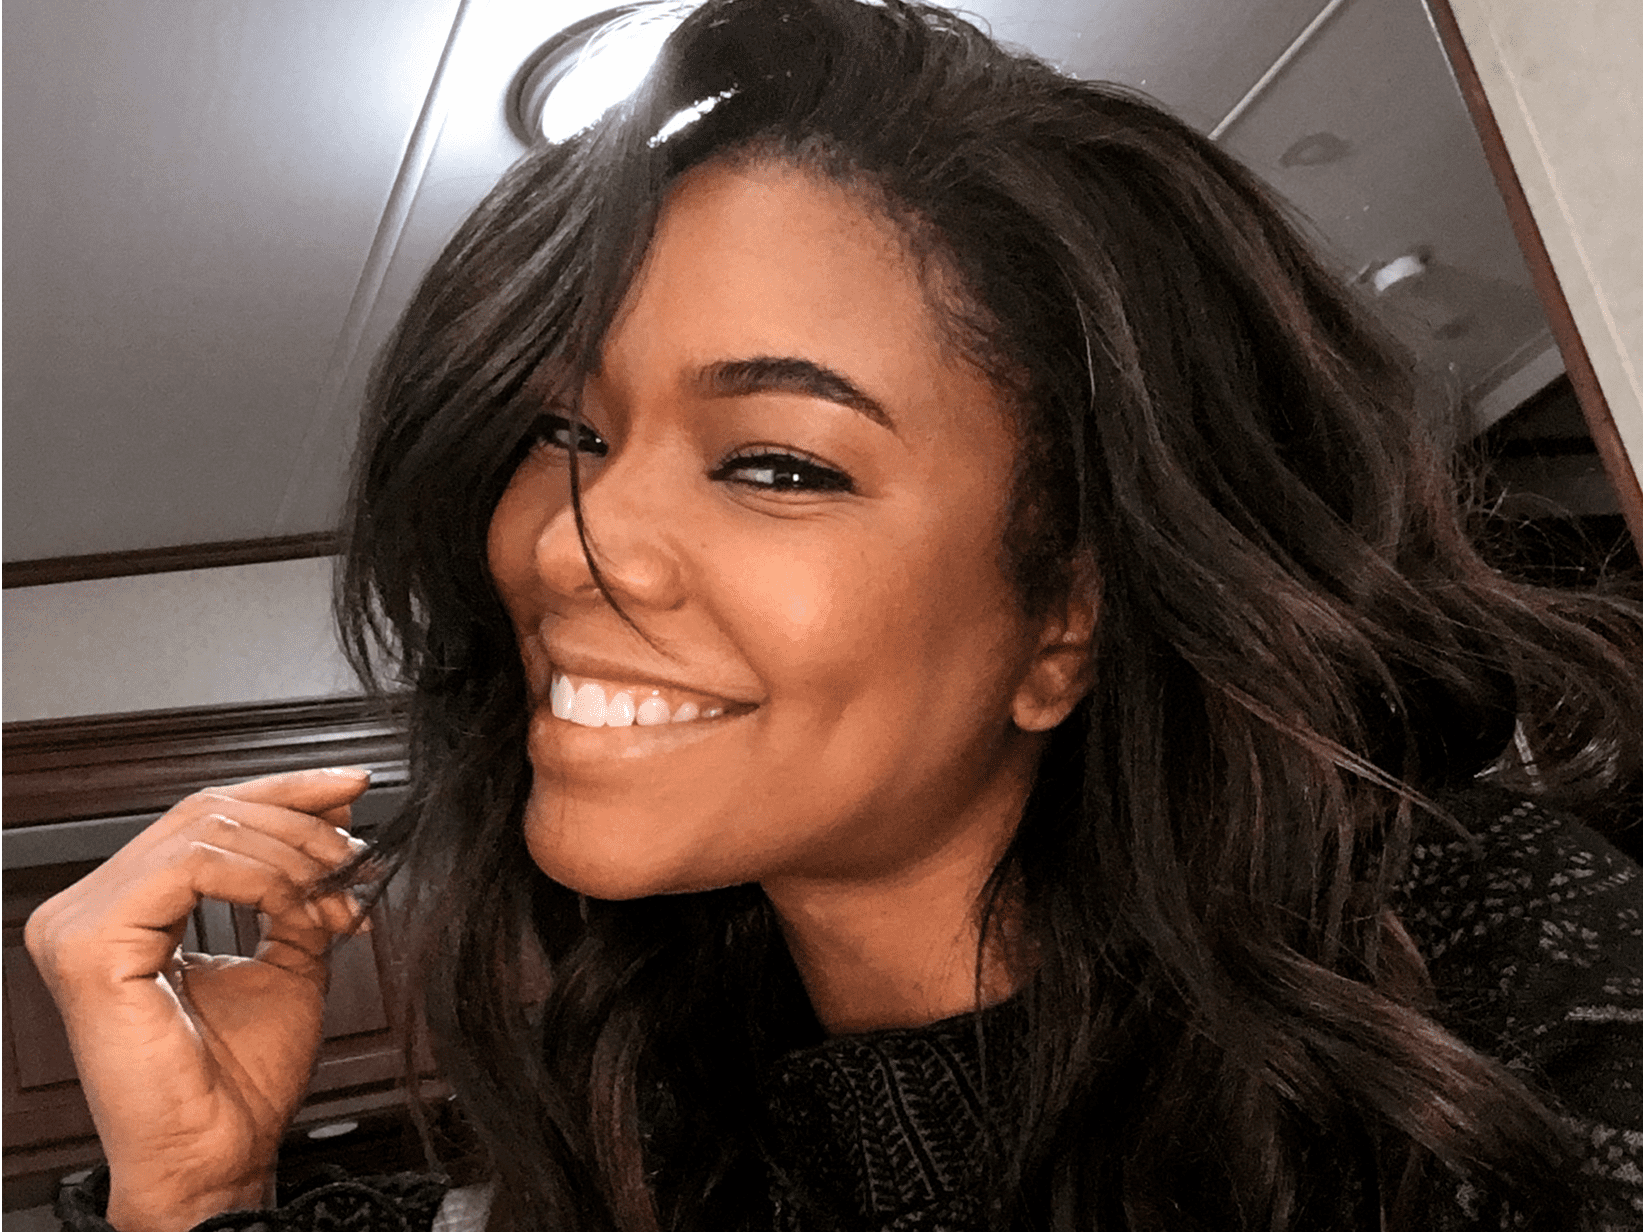 ”gabrielle-union-makes-your-day-with-new-photos-of-her-baby-girl-kaavia-james”